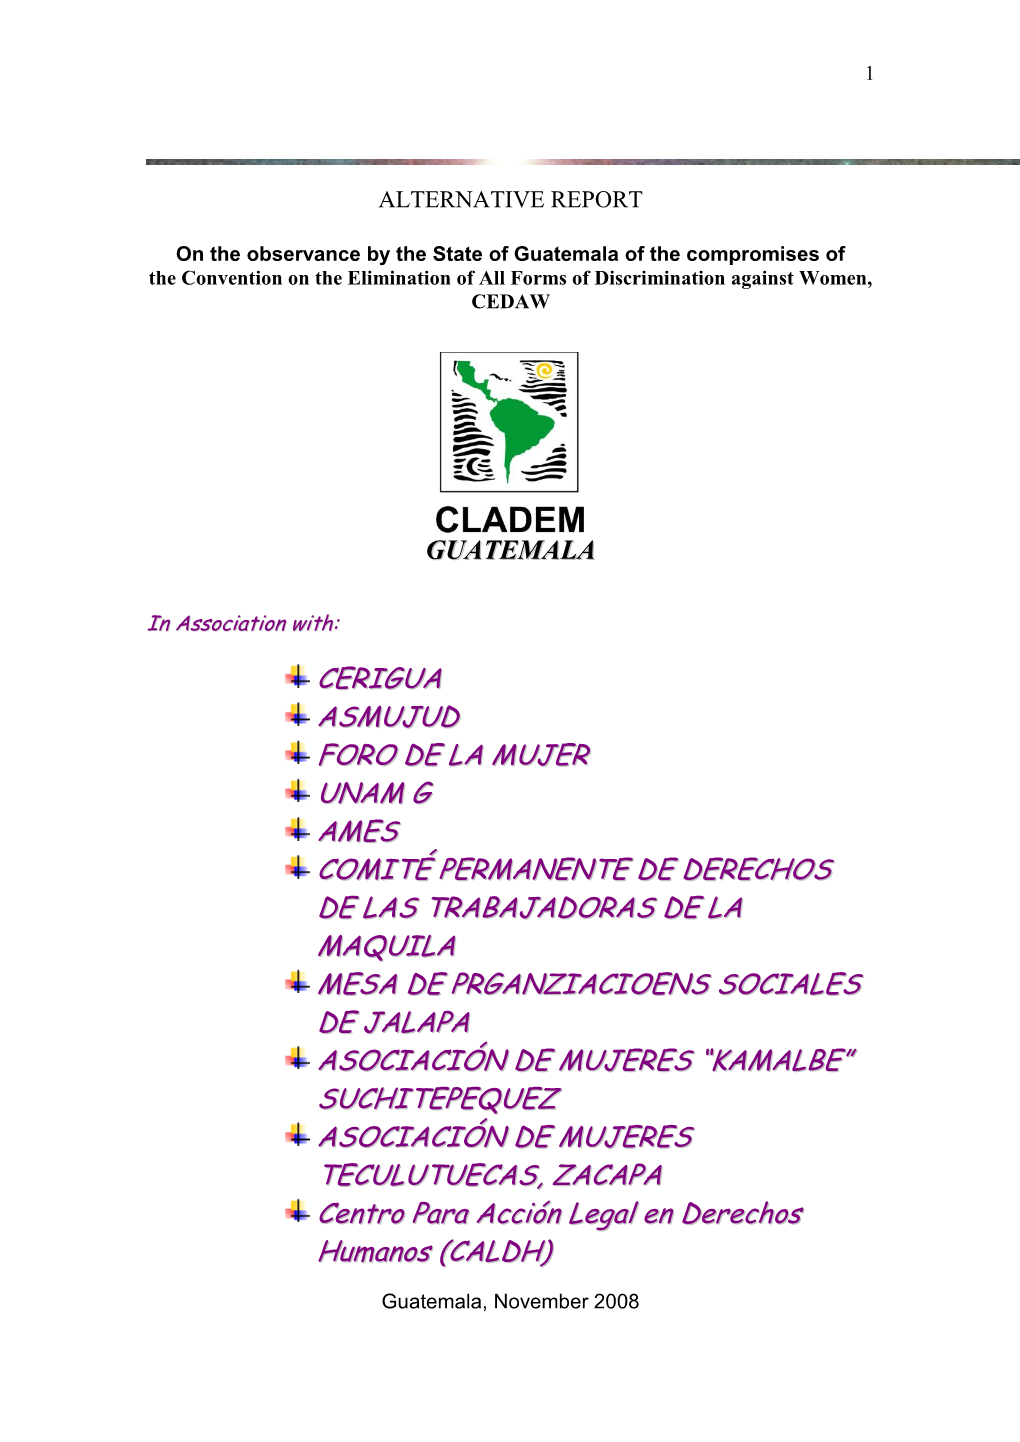 Guatemala of the Compromises of the Convention on the Elimination of All Forms of Discrimination Against Women, CEDAW